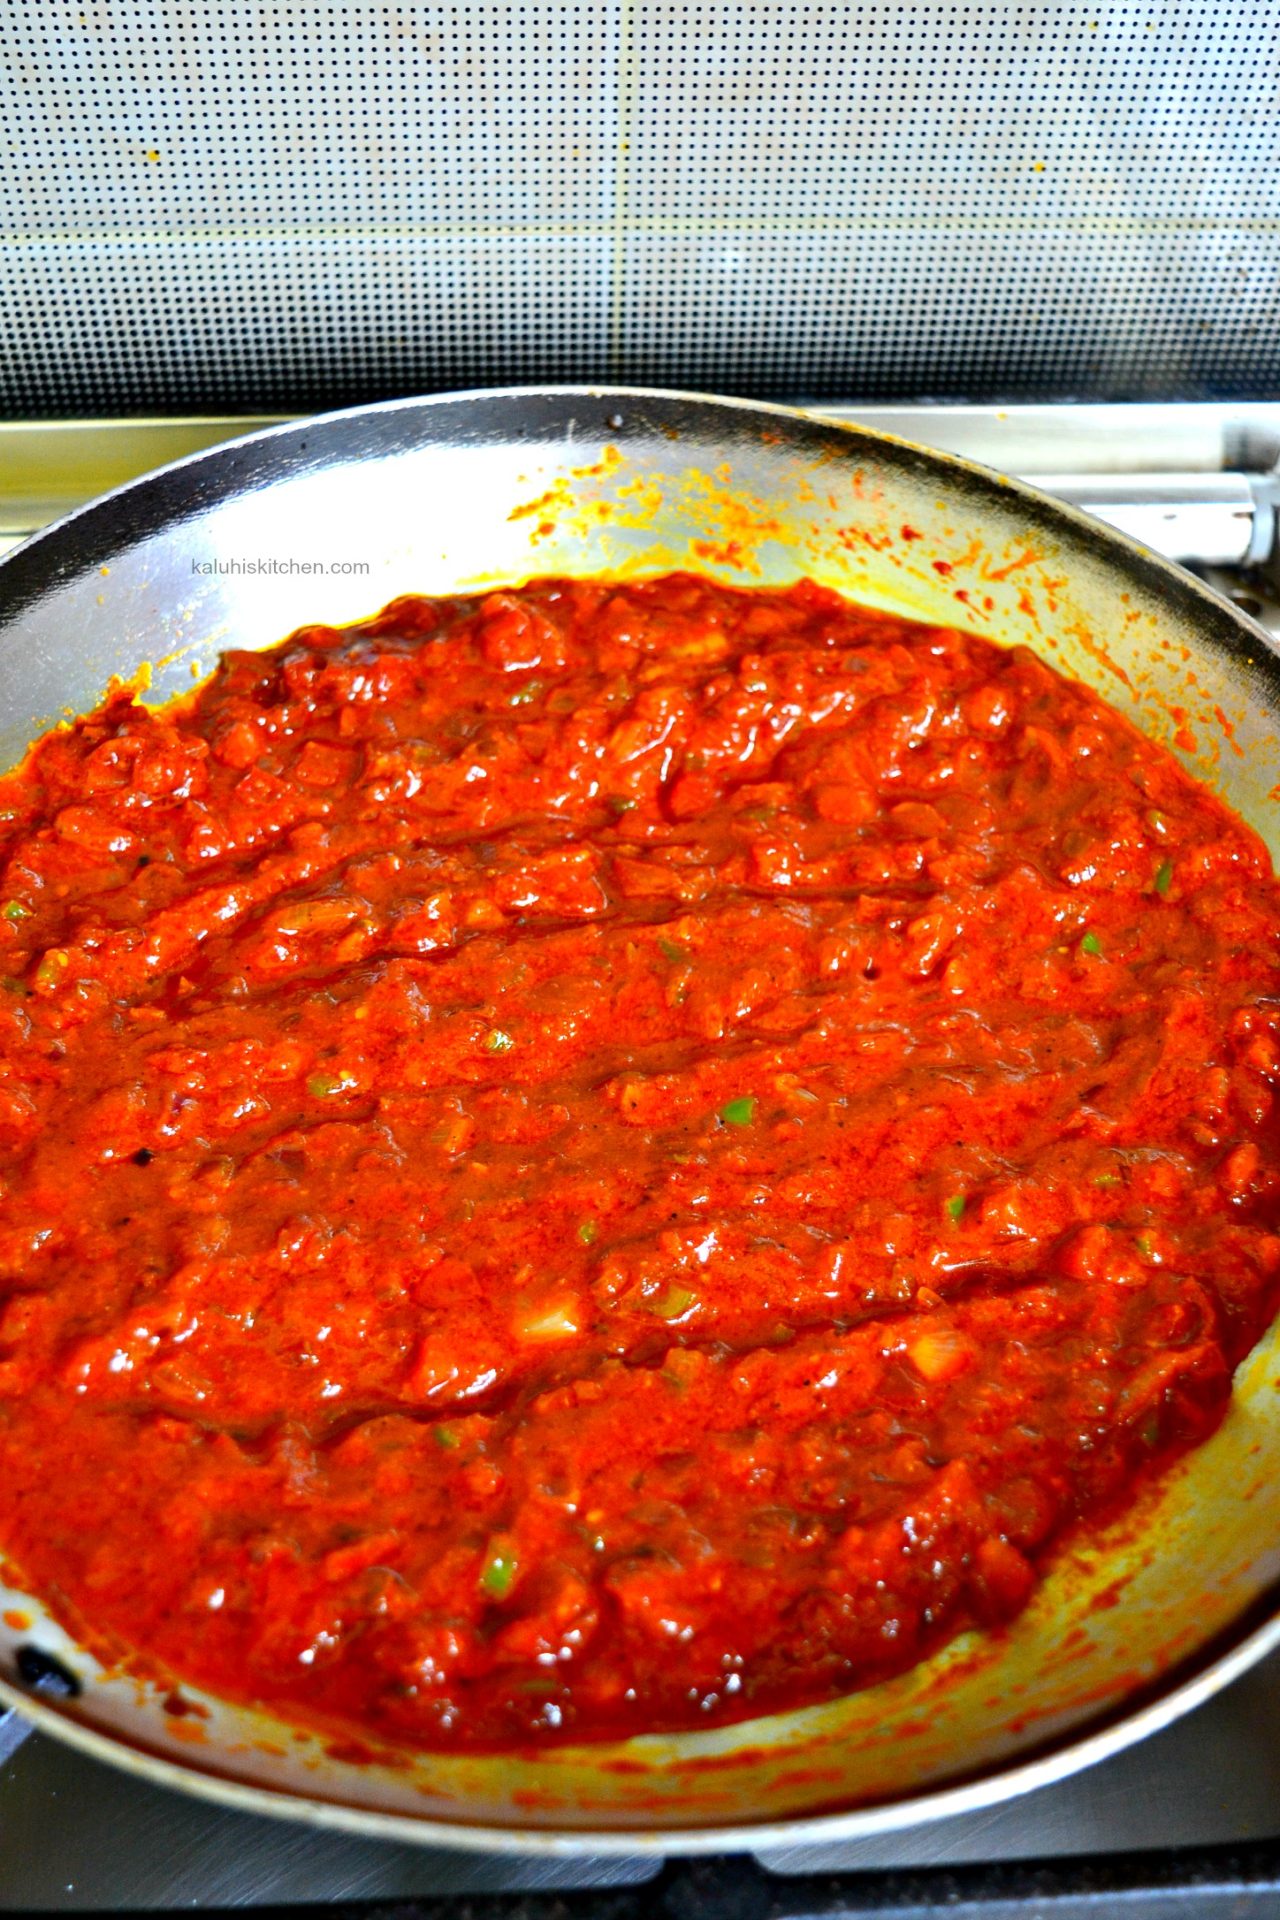 allow the sauce to cook down for about 10-15 minutes so that it thickens and all the flavors blend well_kaluhiskitchen.com